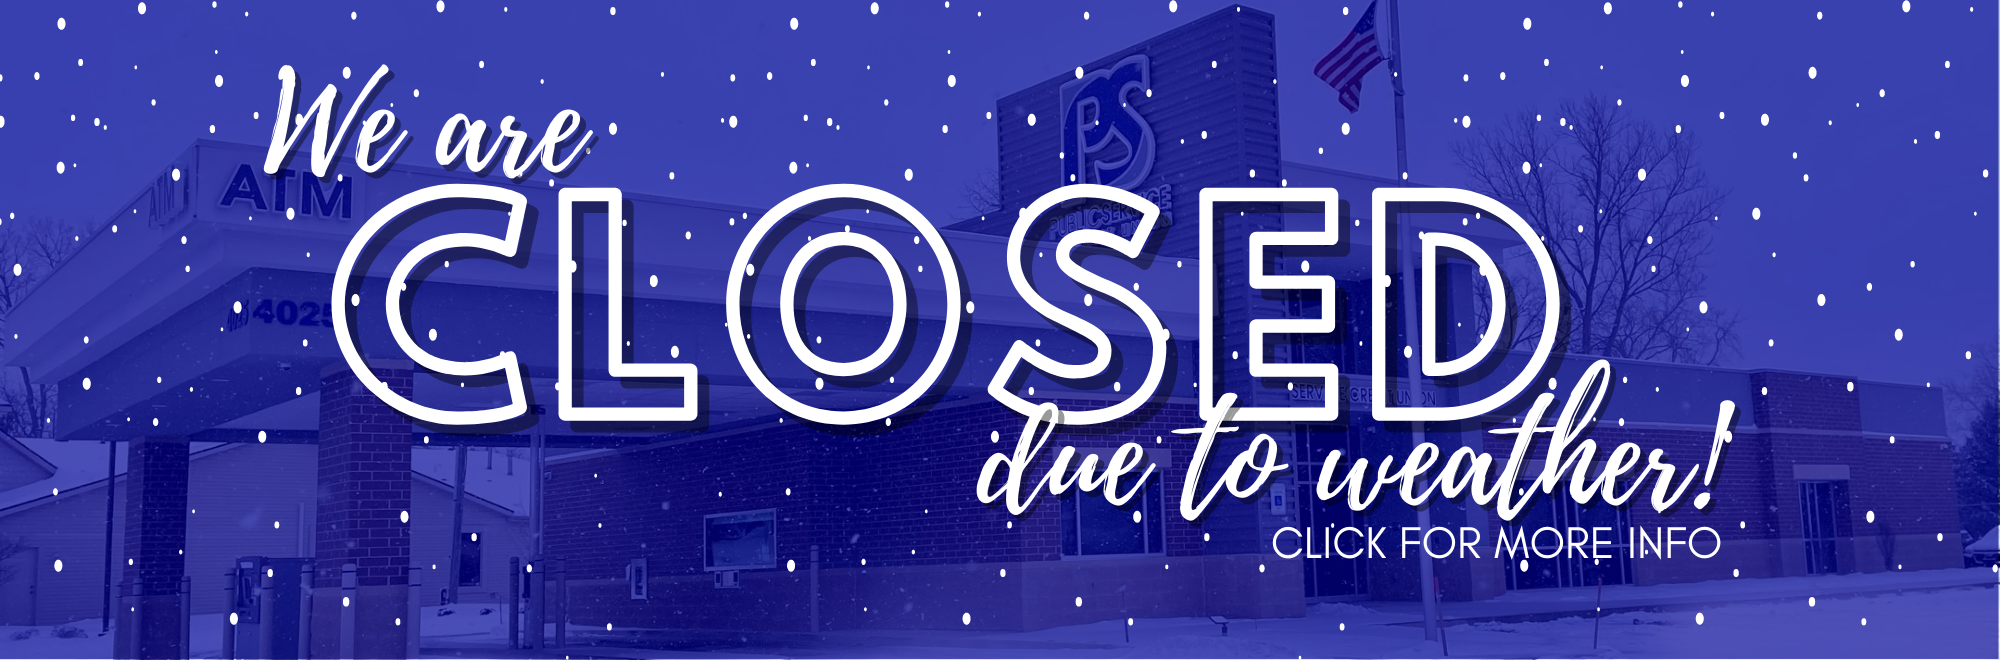 We are closed due to weather. click for more info.